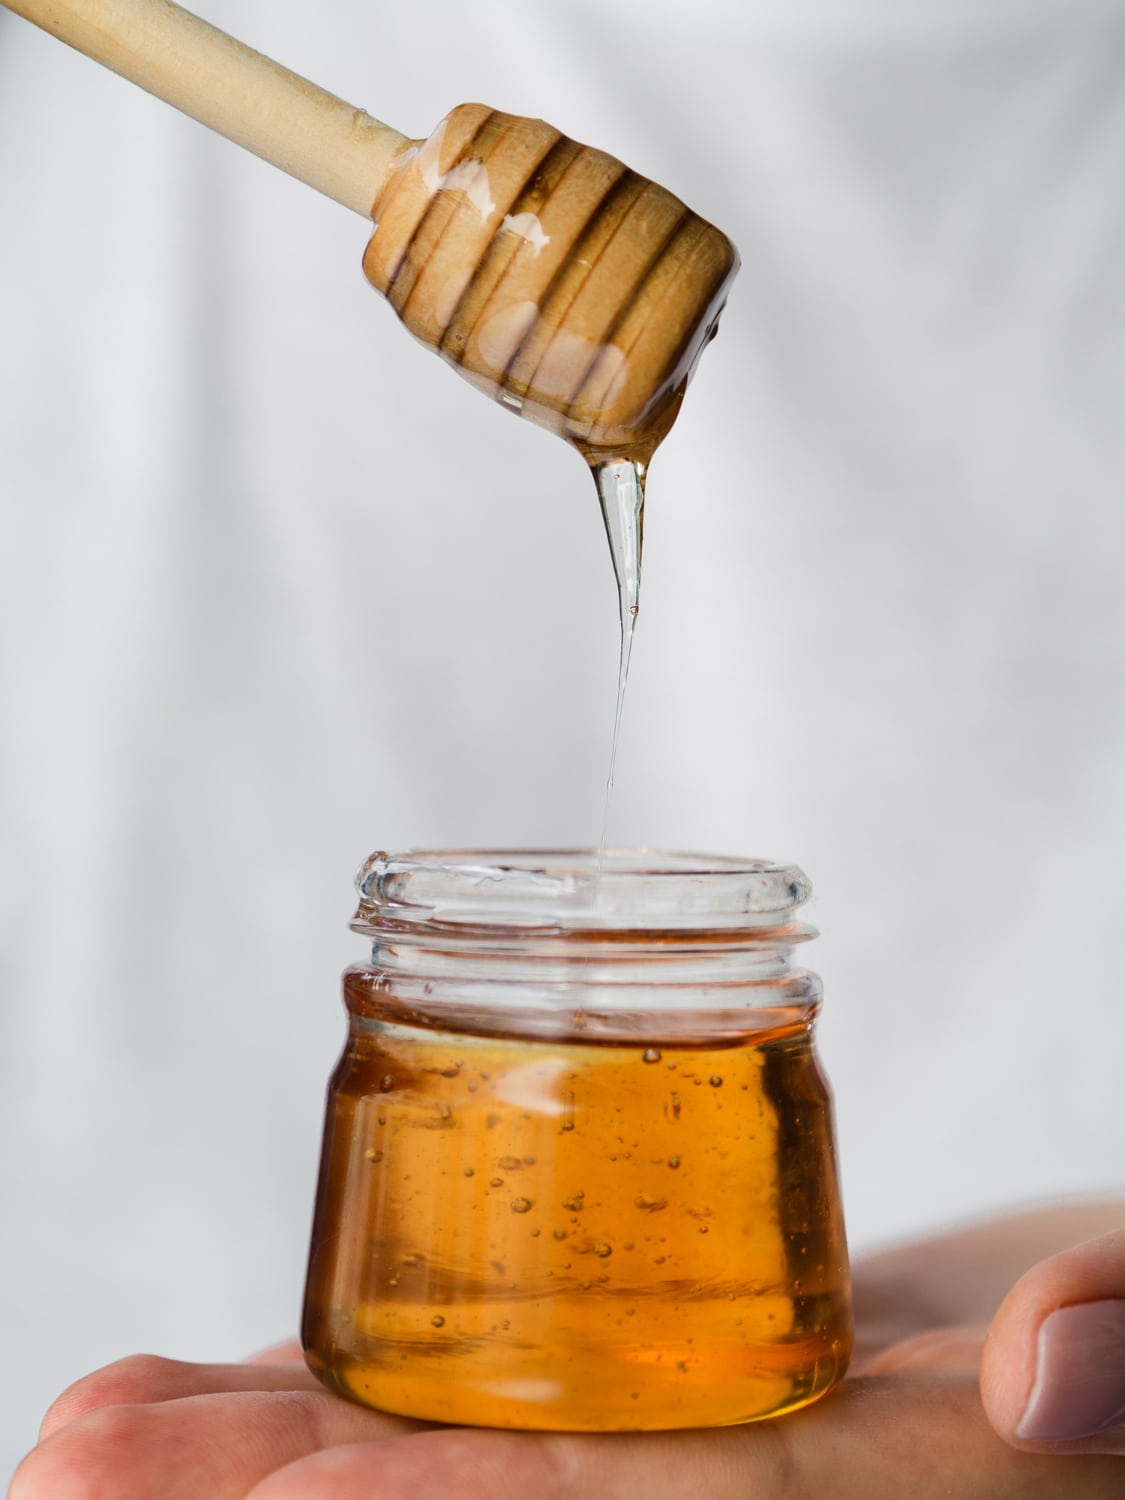 Why Does Quality Matter While Buying Honey On Discount?